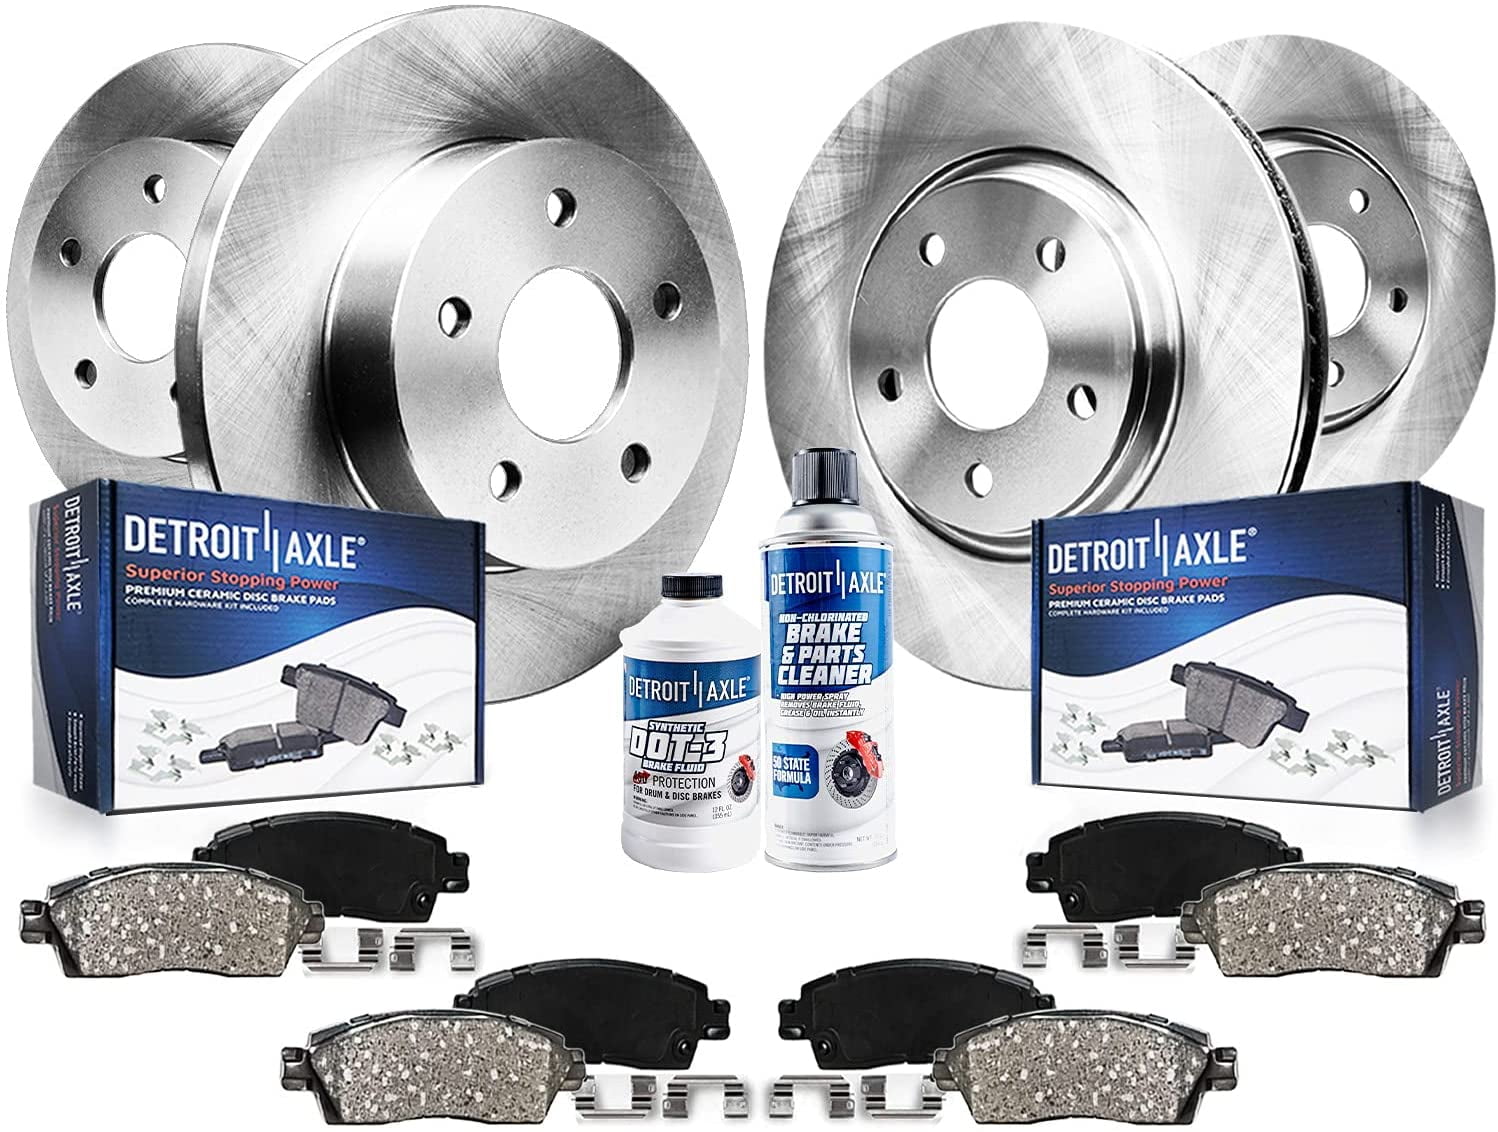 For Chevy Pontiac Cobalt Lt Front 280 mm Brake Disc Rotors And Ceramic Pads